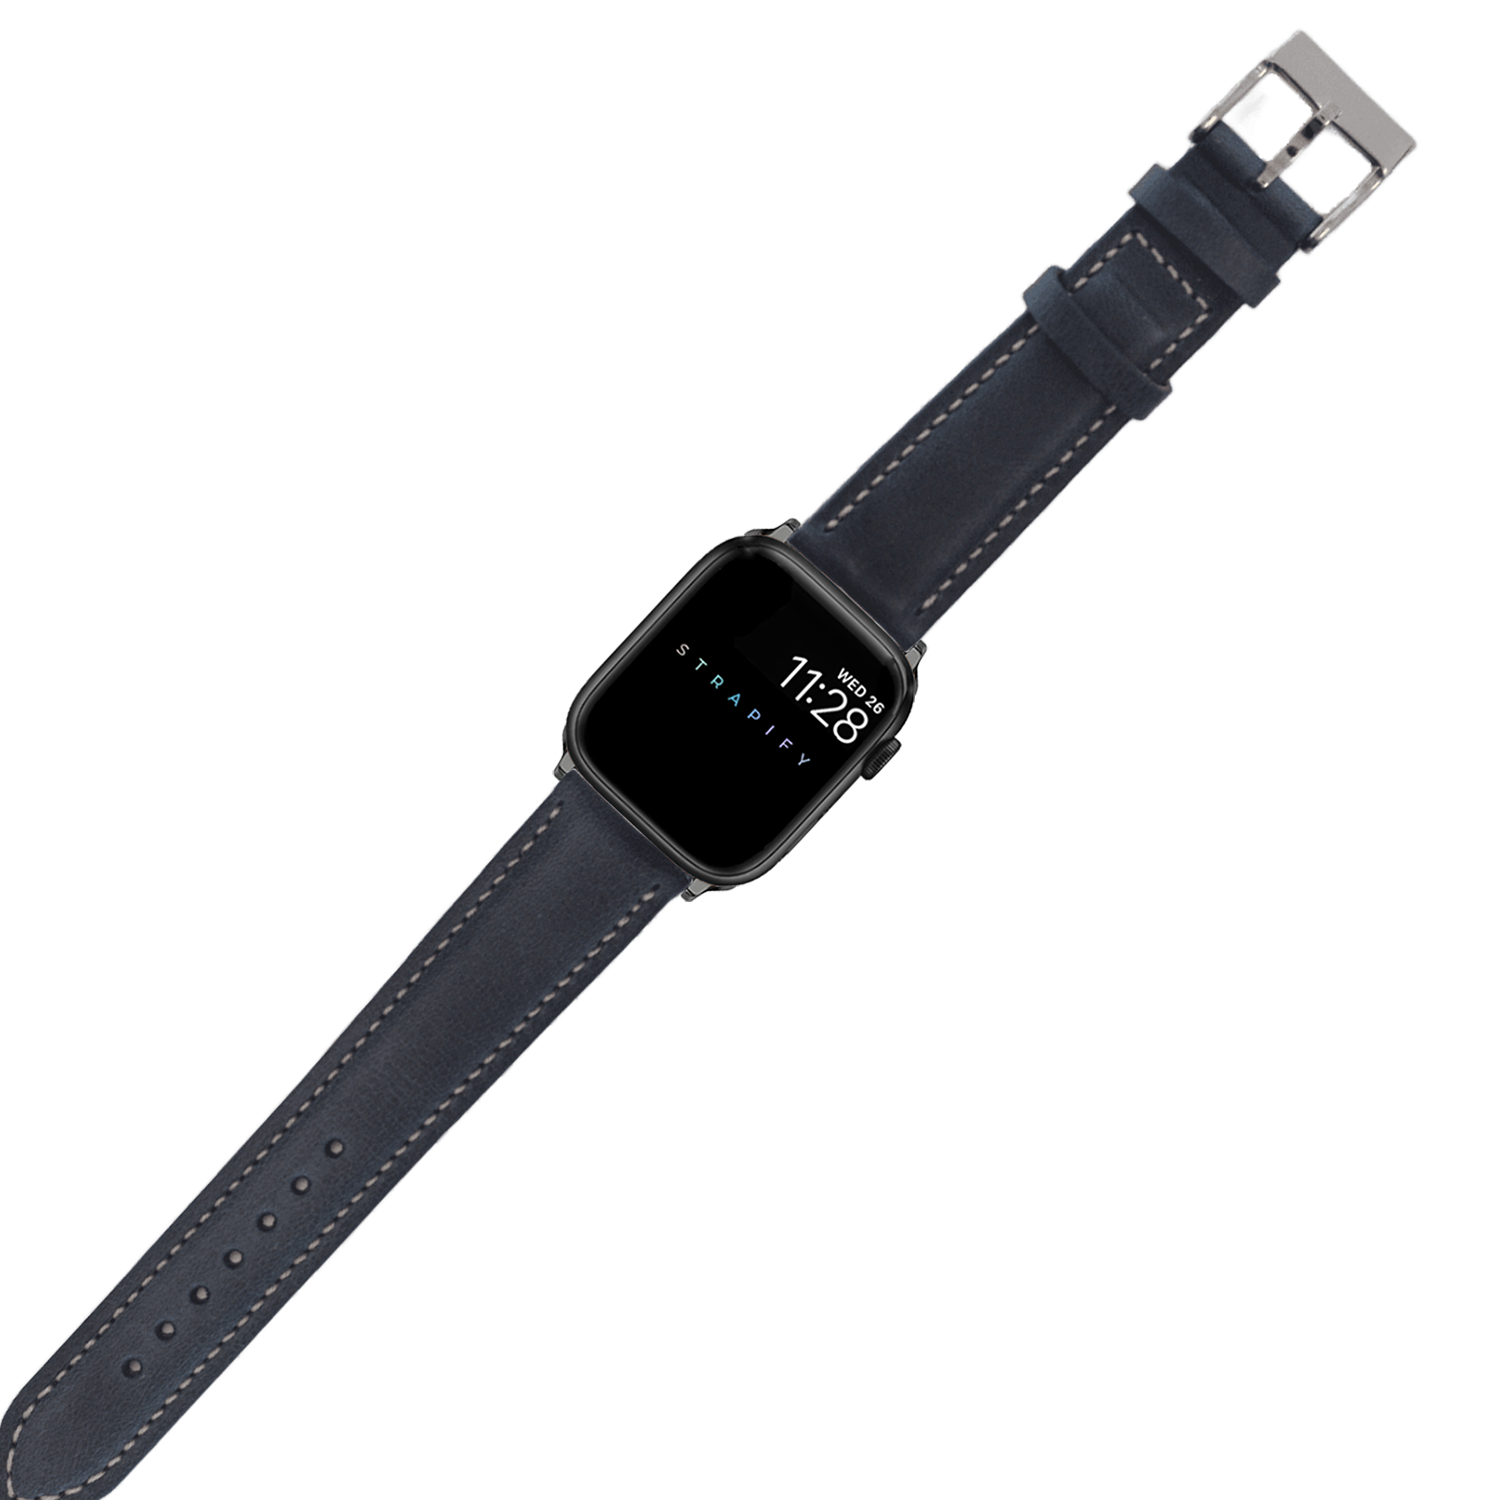 [Apple Watch] Padded Leather - Navy Blue | Beige Stitching